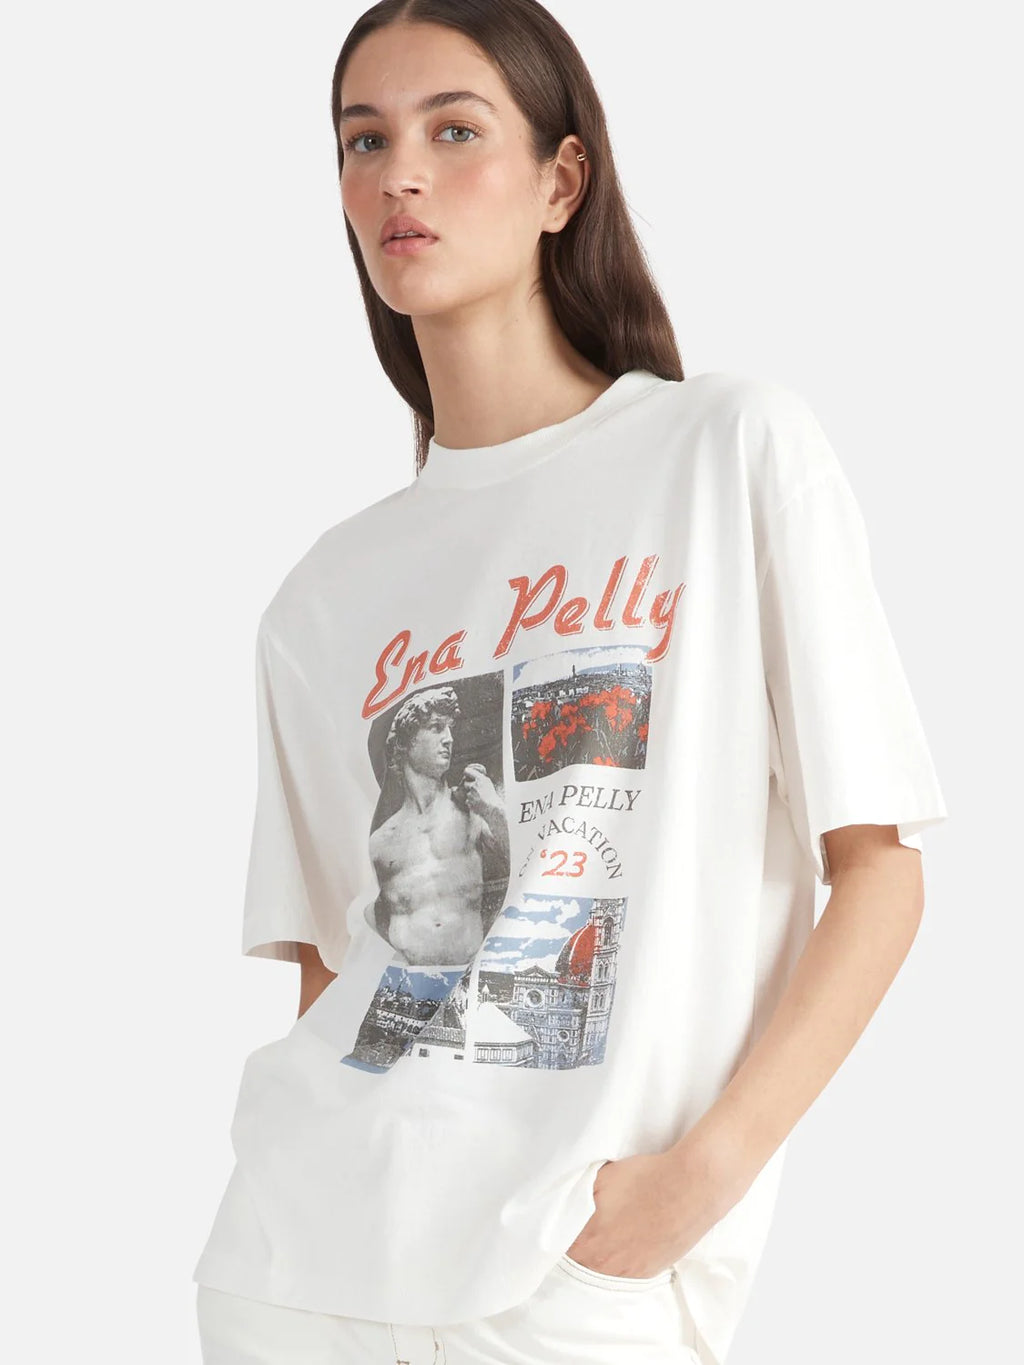 Ena Pelly - On Vacation Relaxed Tee - Vintage White